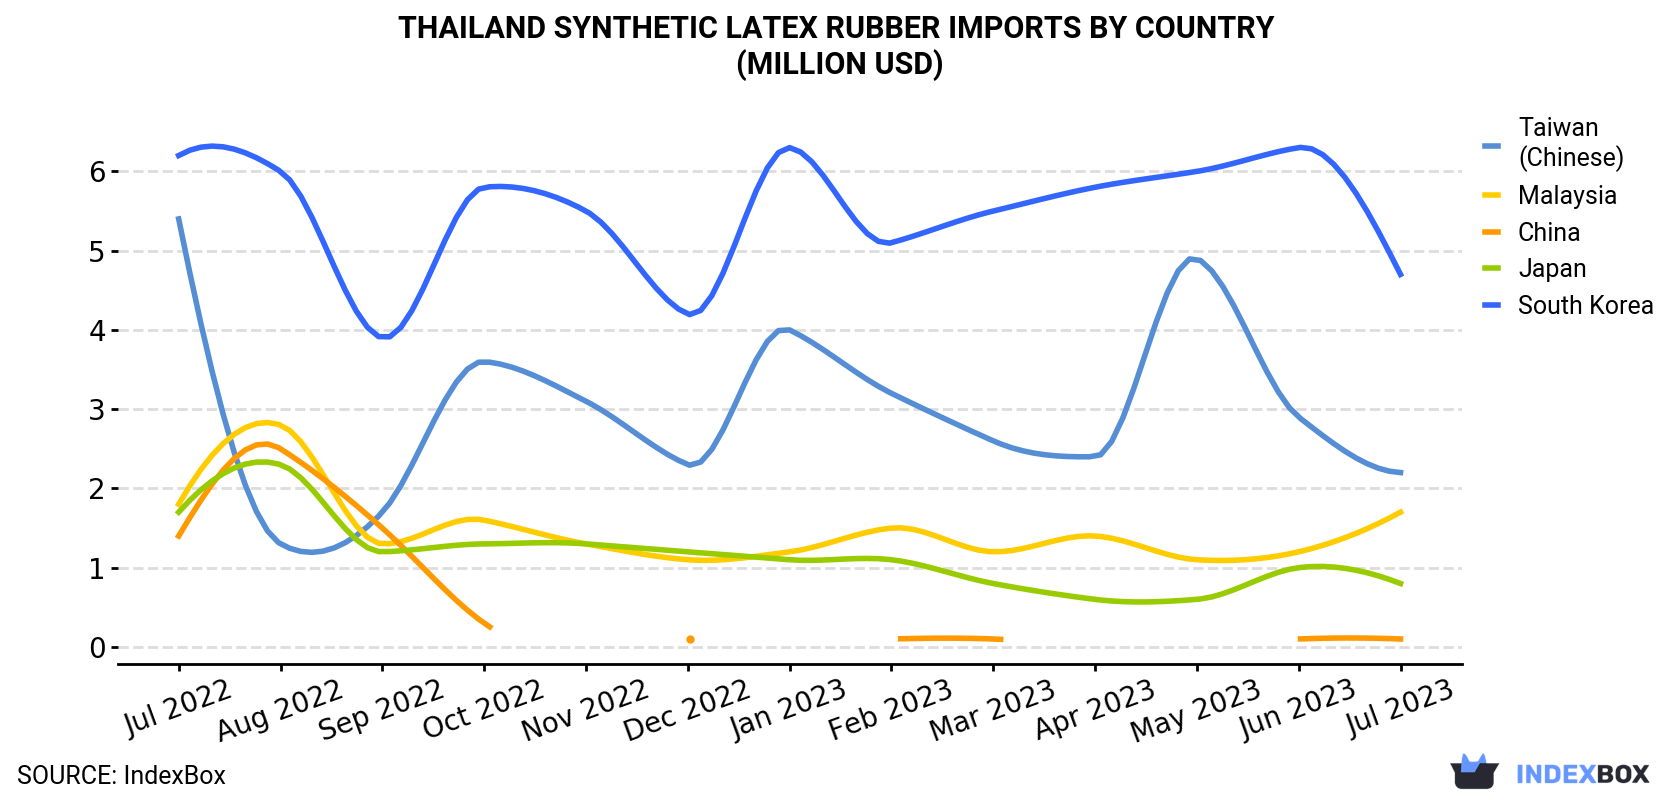 Thailand Synthetic Latex Rubber Imports By Country (Million USD)